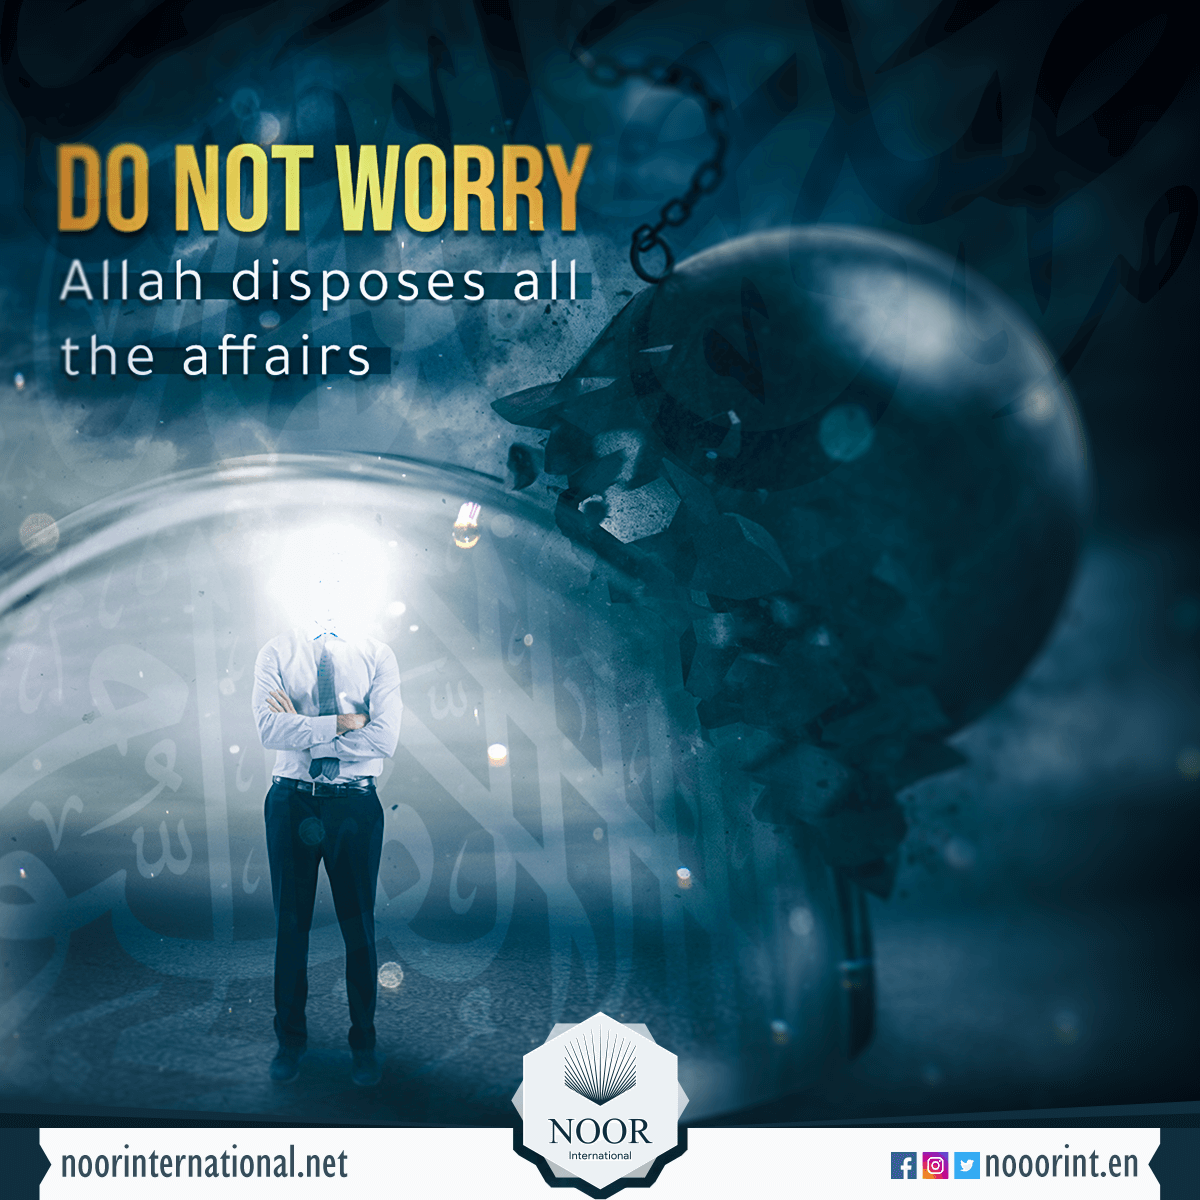 Do not worry, Allah disposes all the affairs